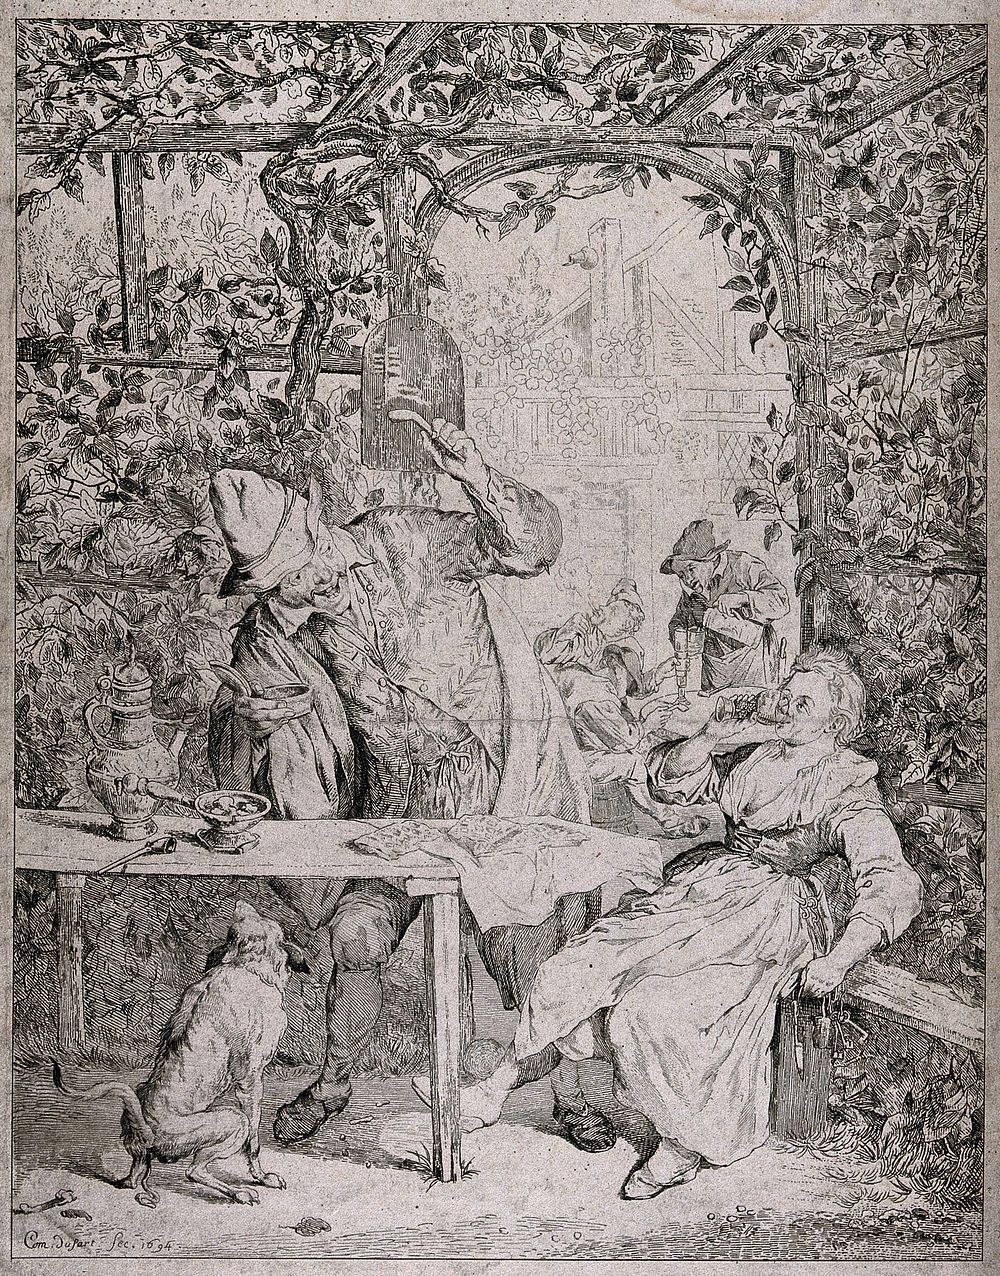 A young woman sits drinking in an arbor as a man prepares to smoke at the table beside her. Etching by C. Dusart, 1694.